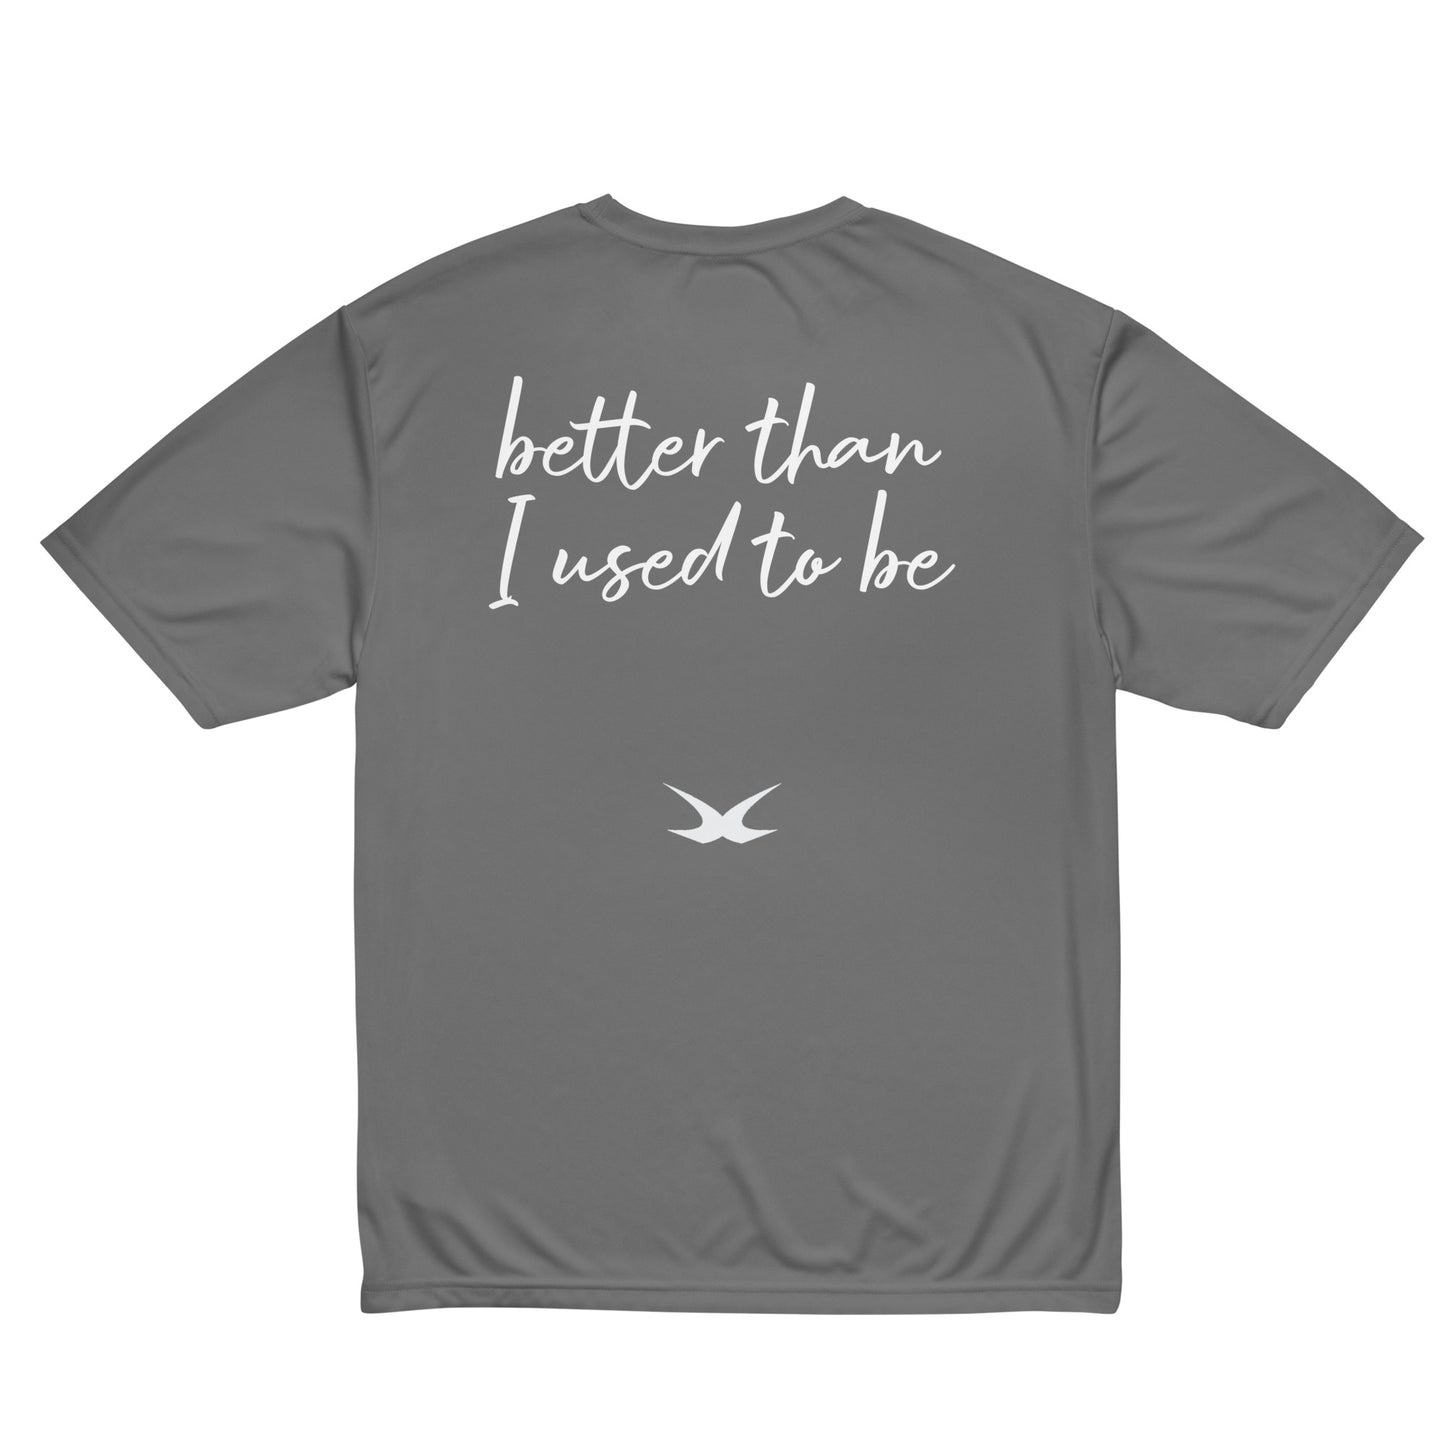 Better Than I Used To (Poly Tee)